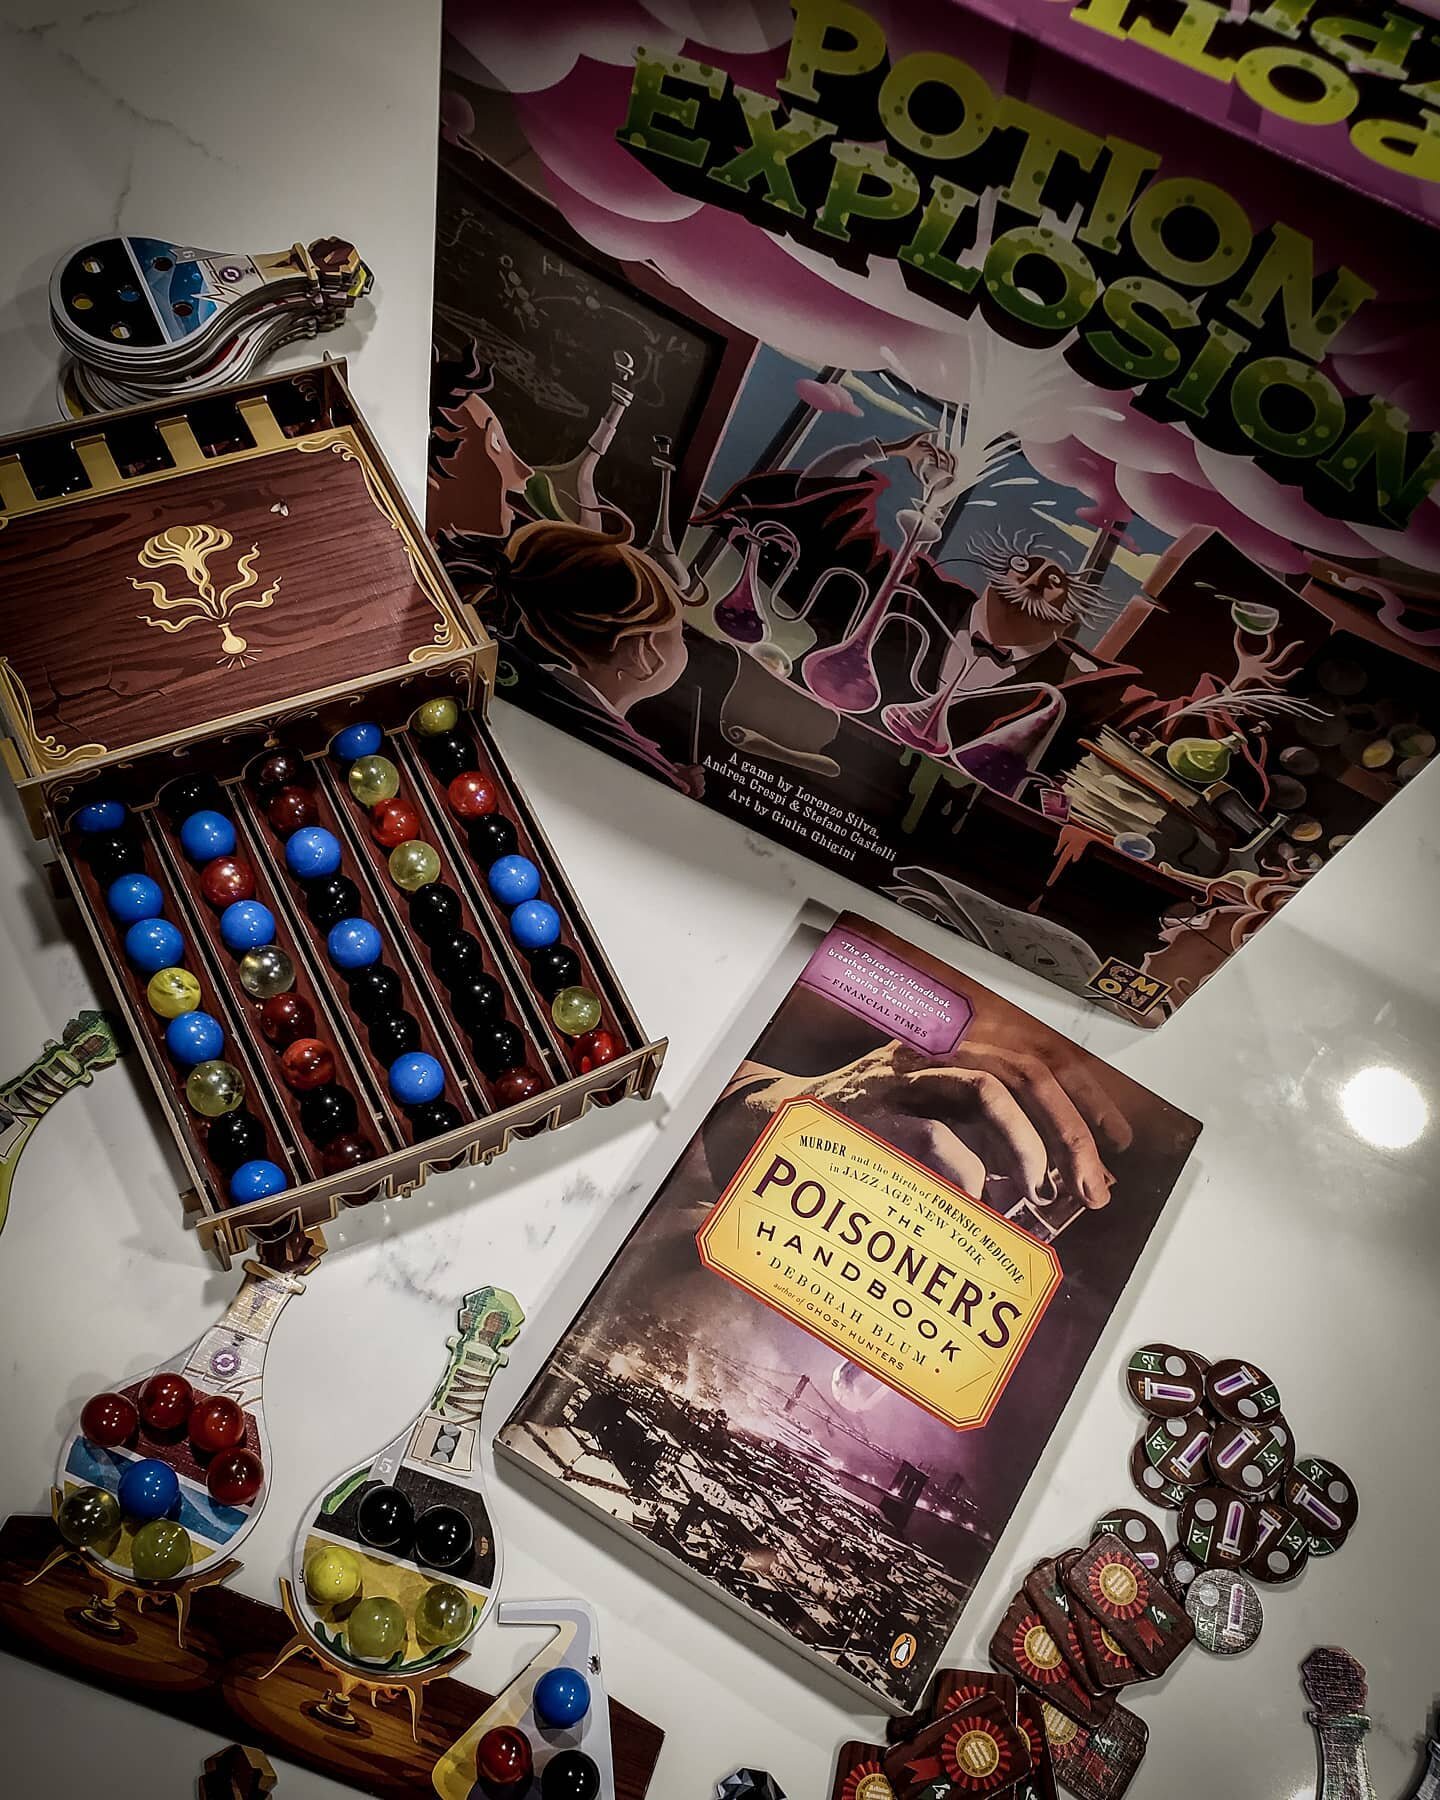 The other day we played one of our favorite games, Potion Explosion. I decided to take start a fun new series of pictures of #booksandboardgames (I say start but as I typed the hashtag I see it has been used before). So I have paired it here with The